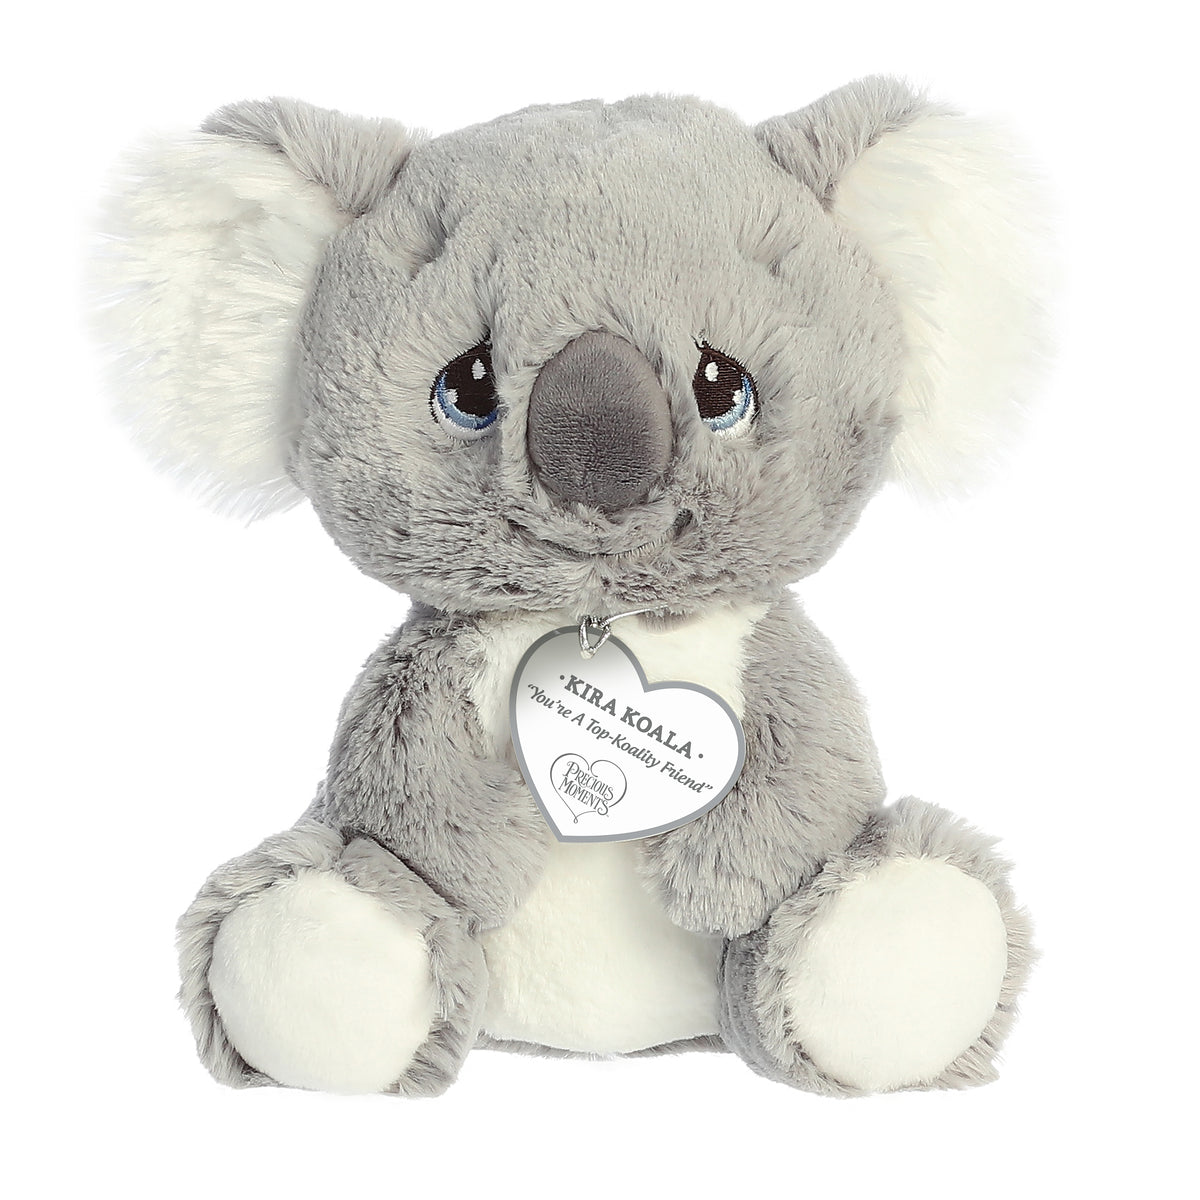 A seated gray koala plush with tear-drop eyes and a precious moments inspirational tag around its neck.